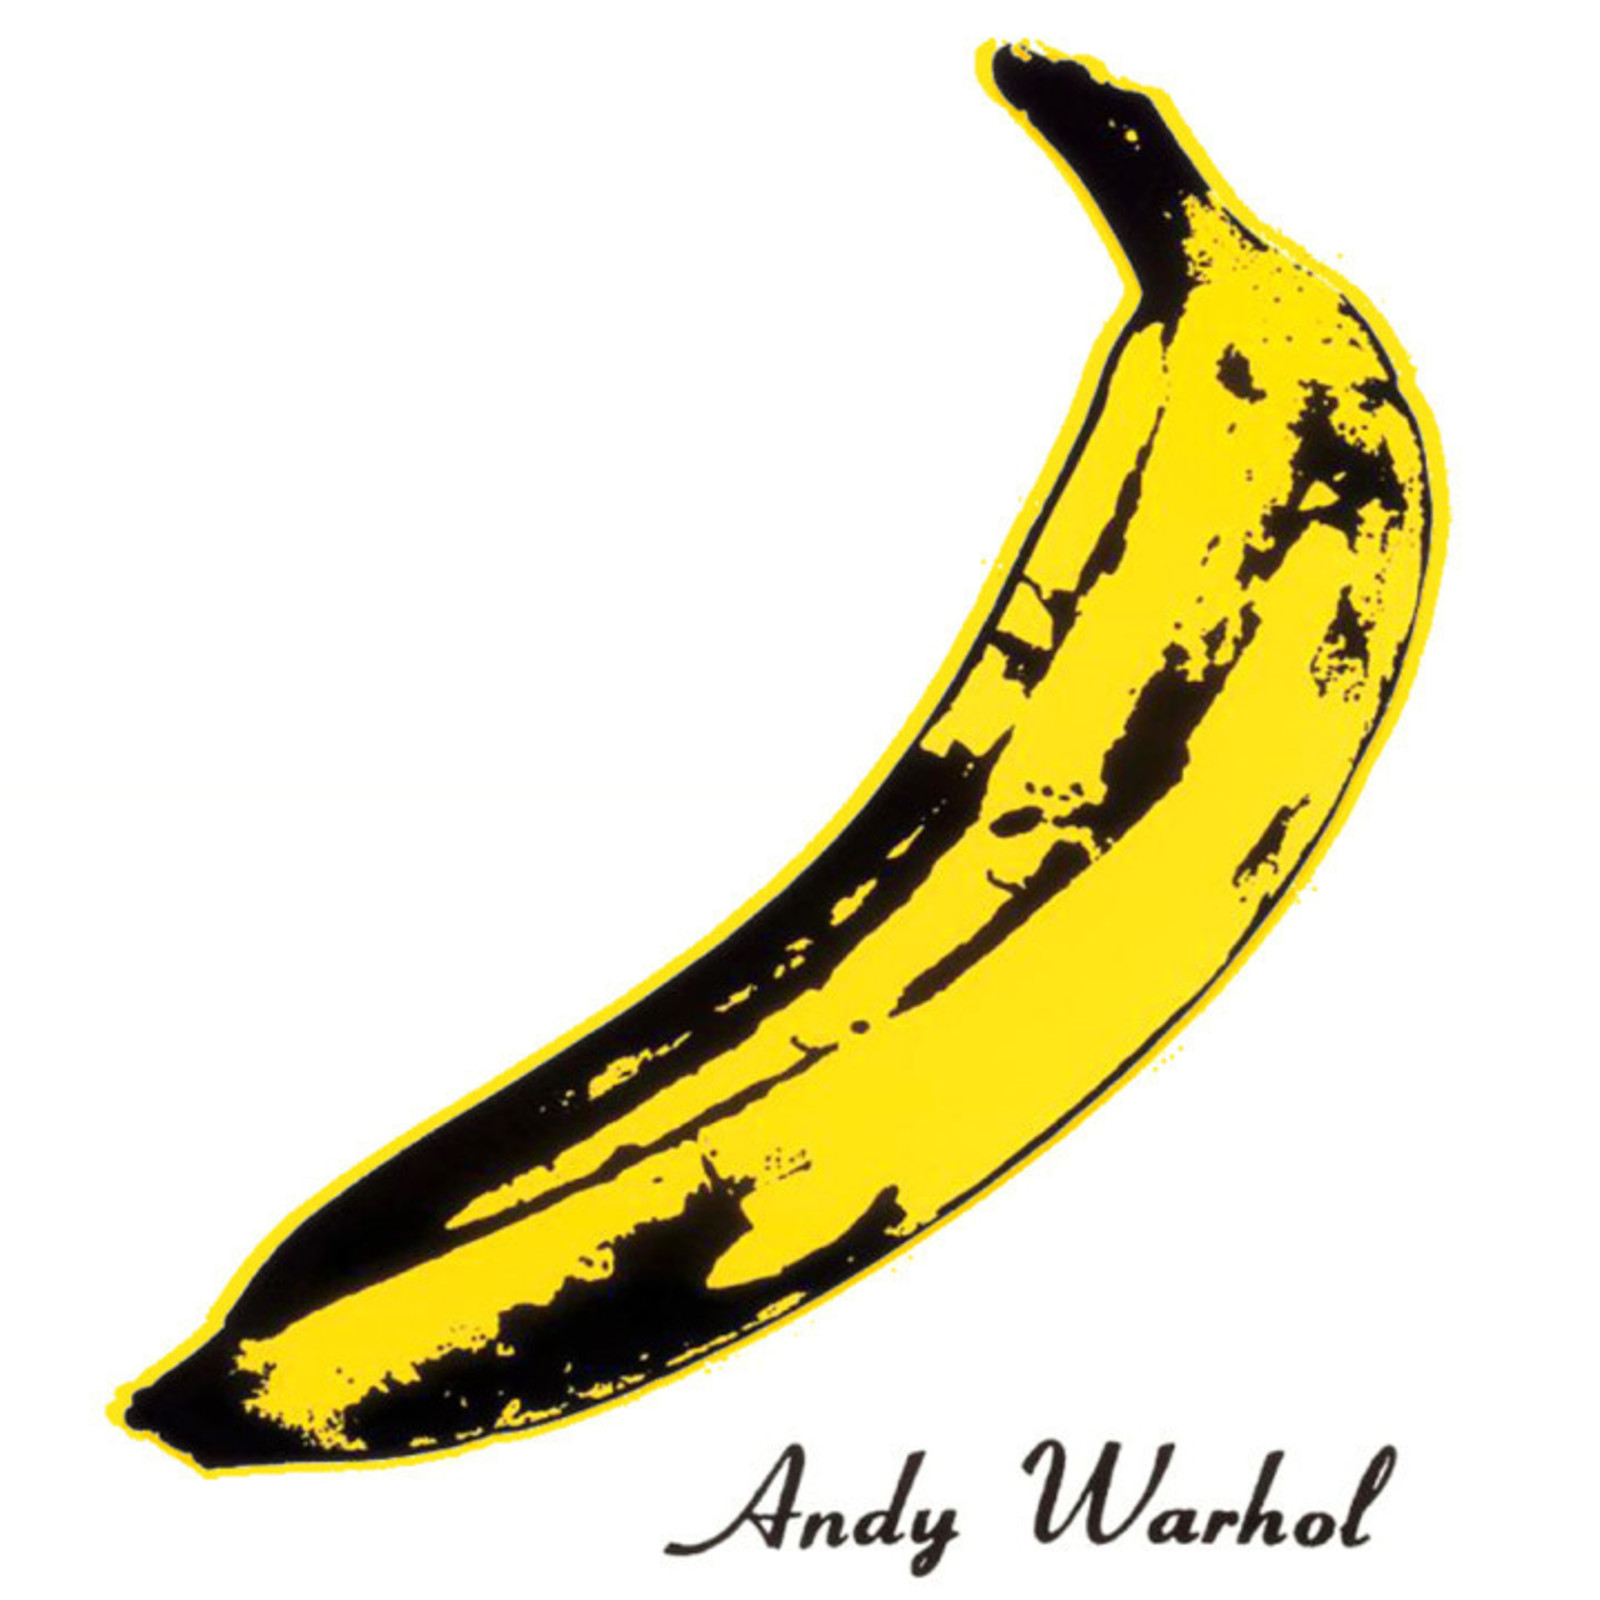 Andy Warhol. Cover art for the album "The Velvet Underground and Nico". 1967